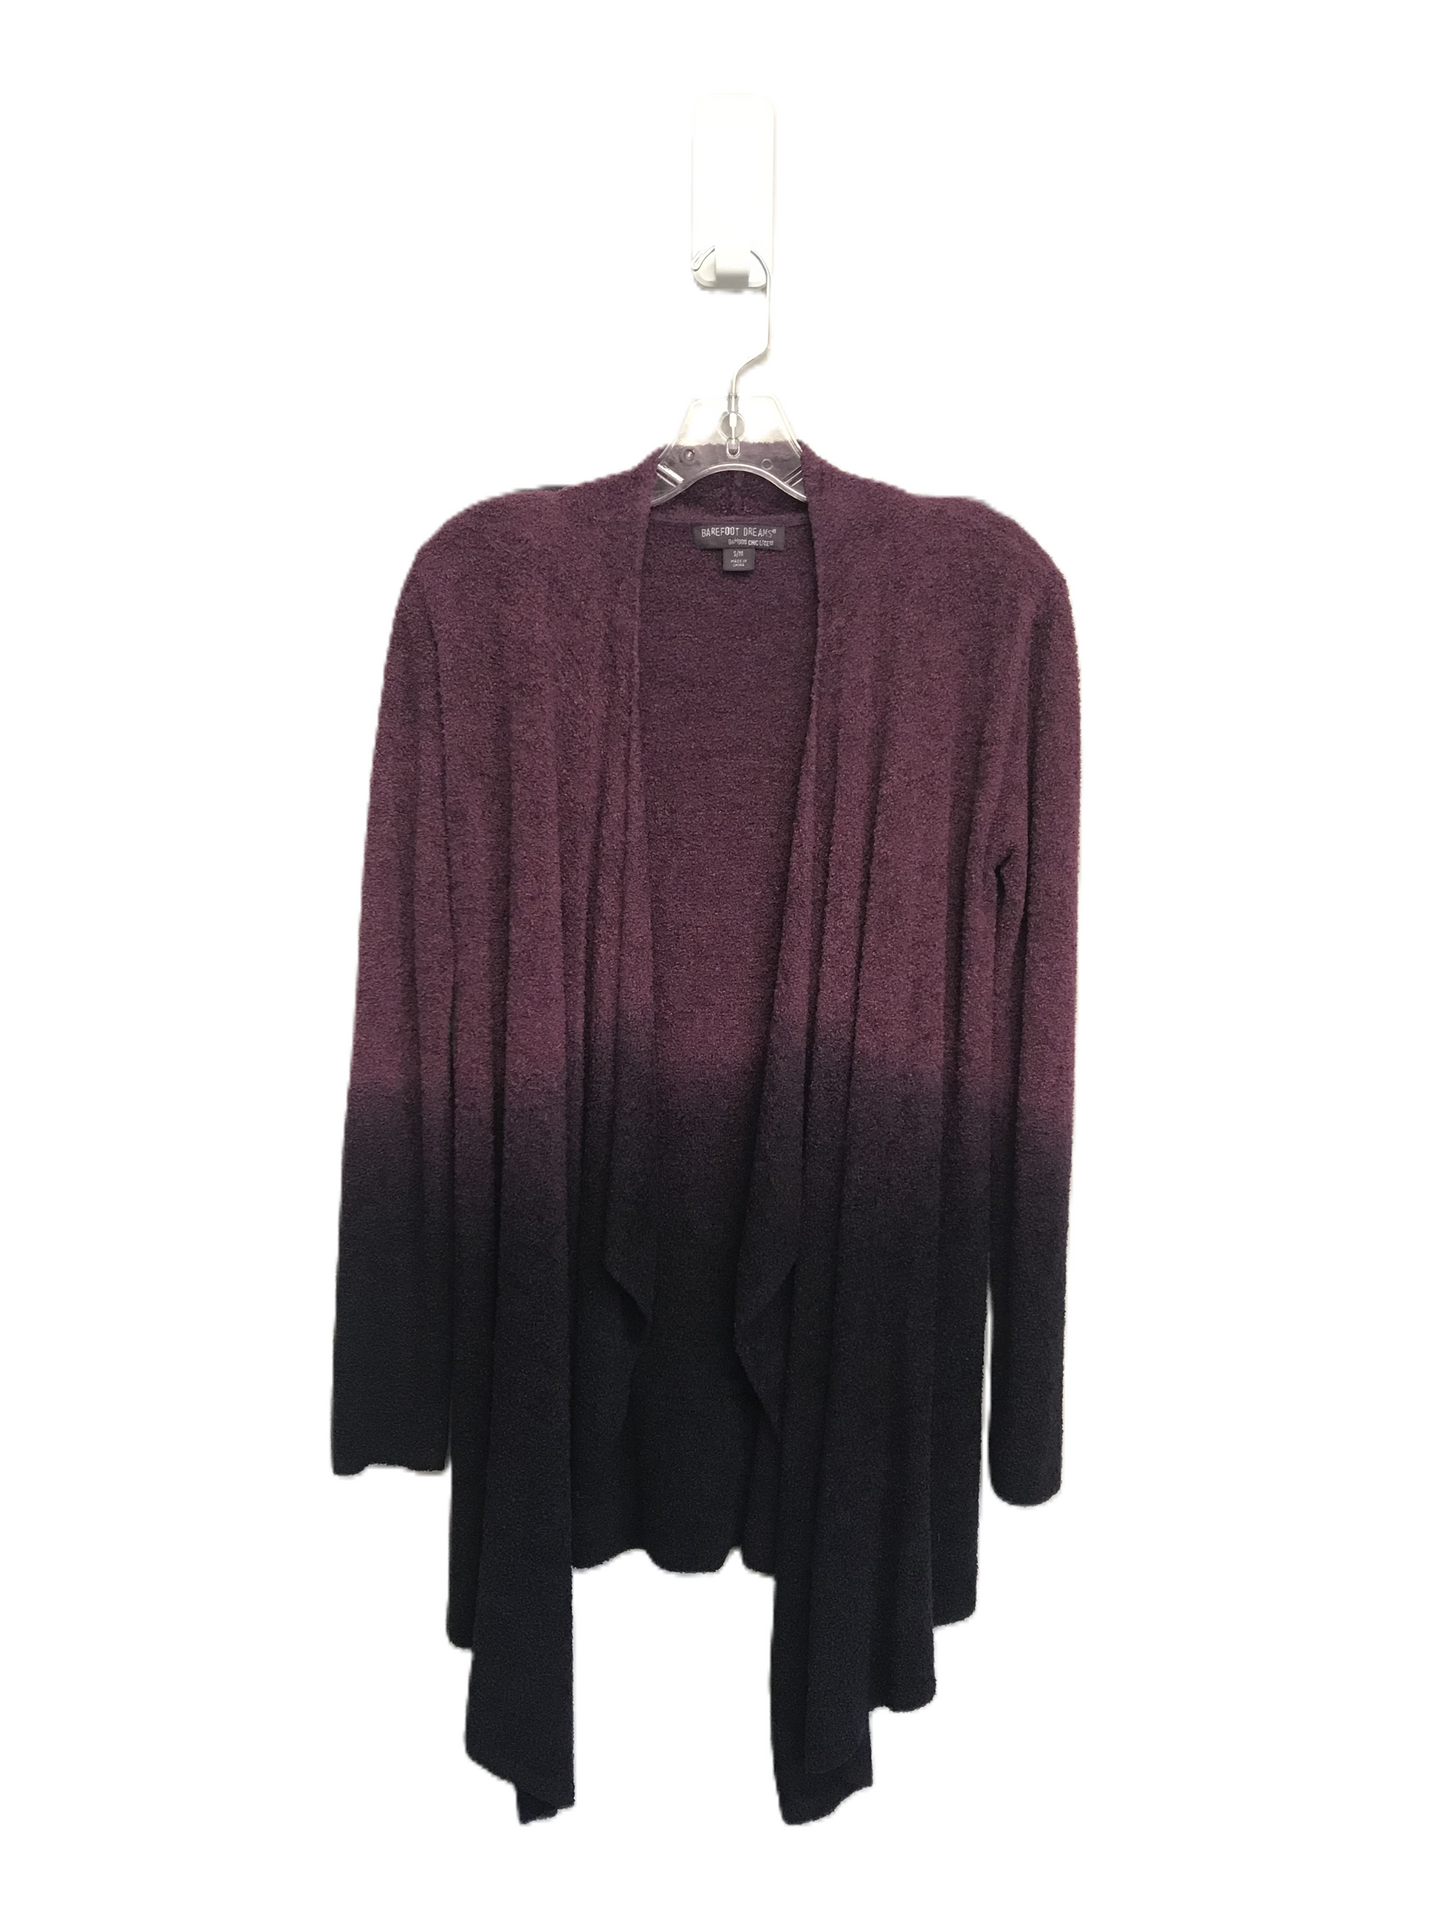 Sweater Cardigan By Barefoot Dreams  Size: S